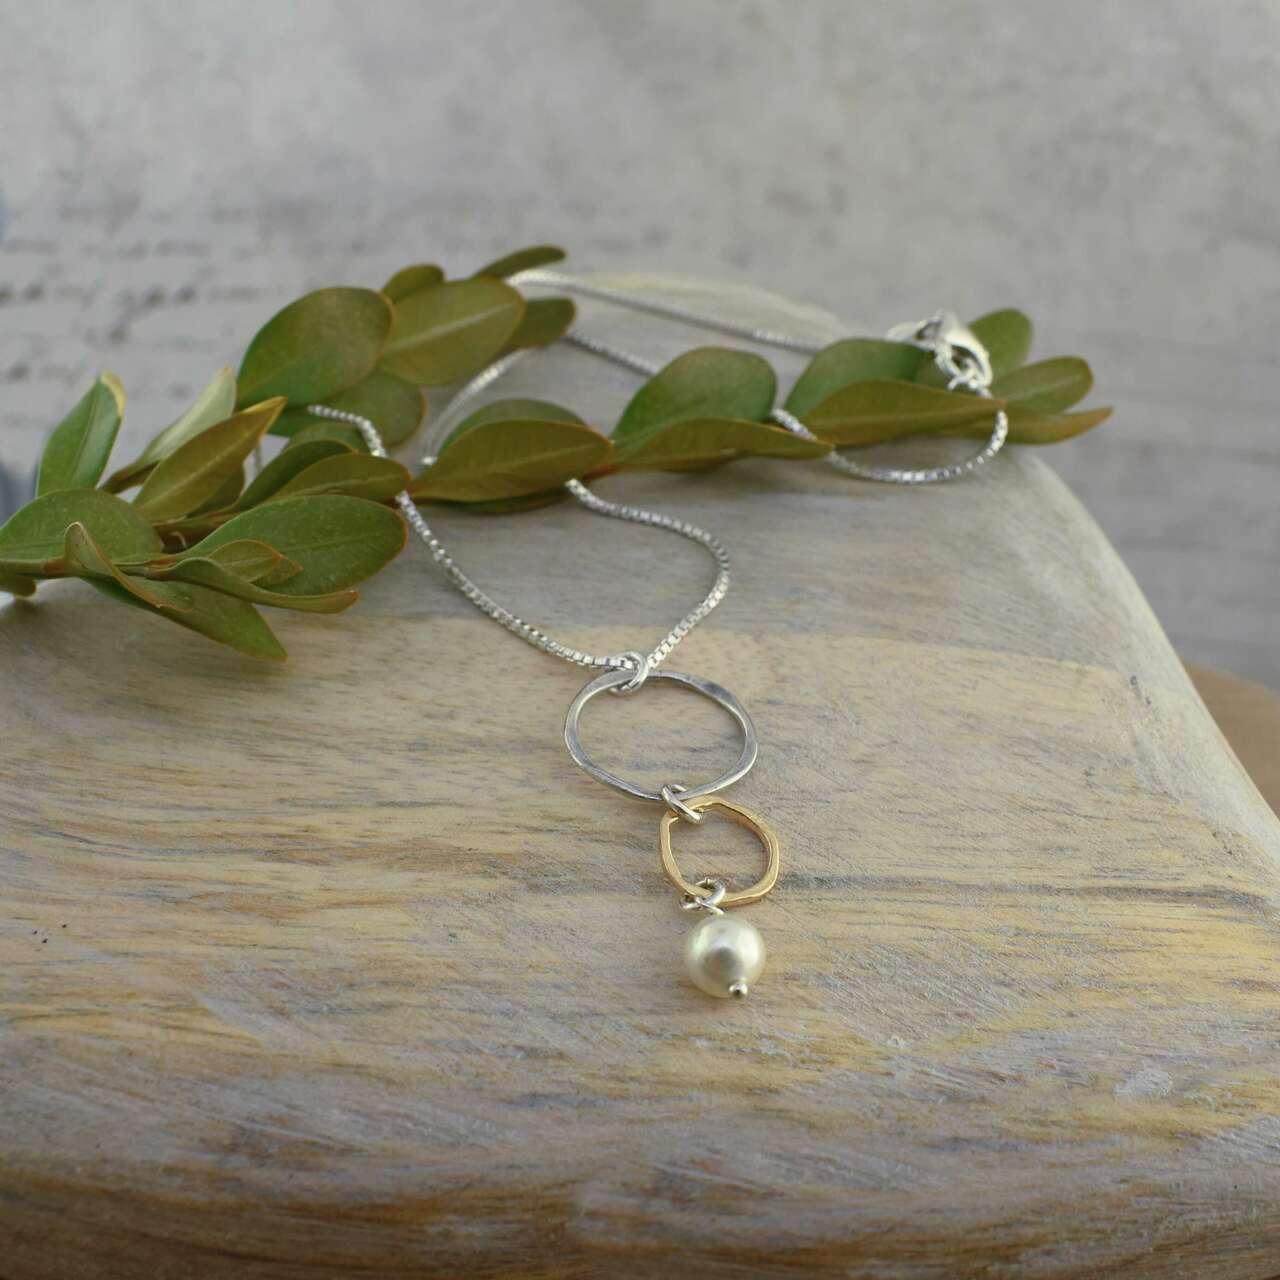 Two-toned sterling silver and vermeil necklace